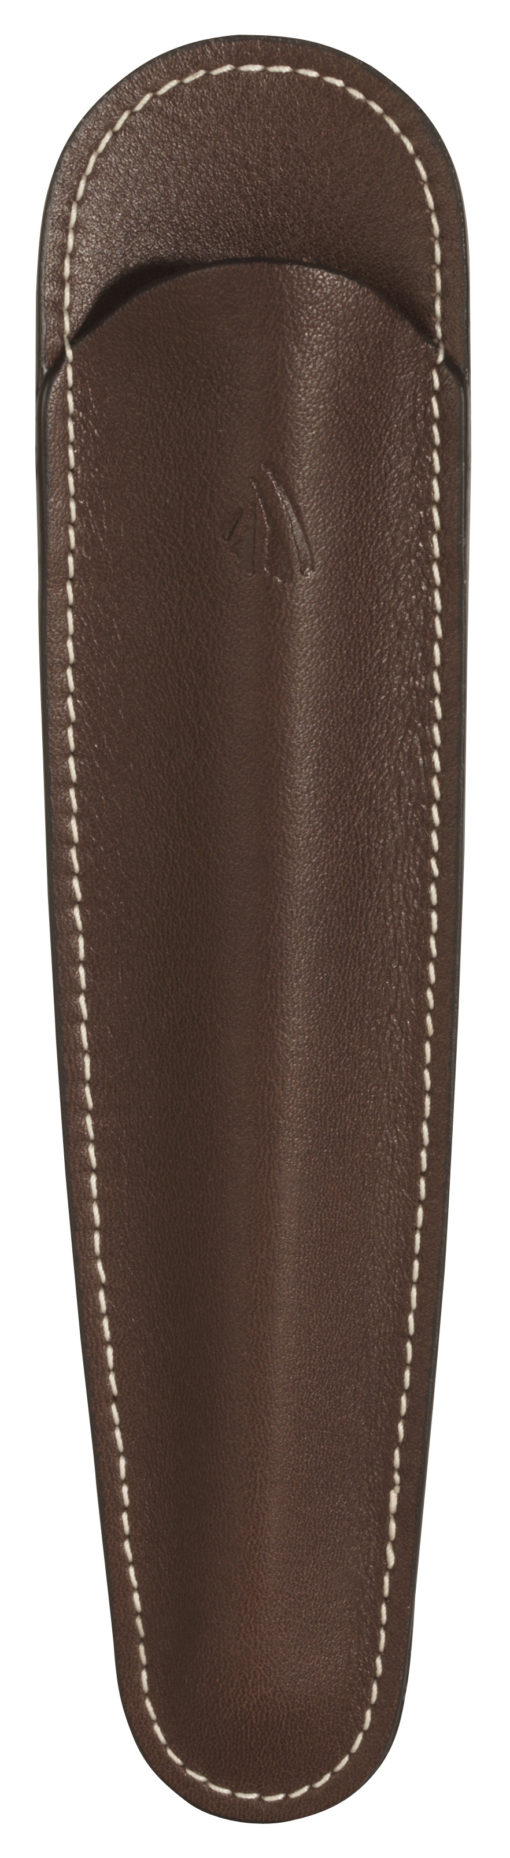 RECIFE LEATHER PEN POUCH CHOCOLATE